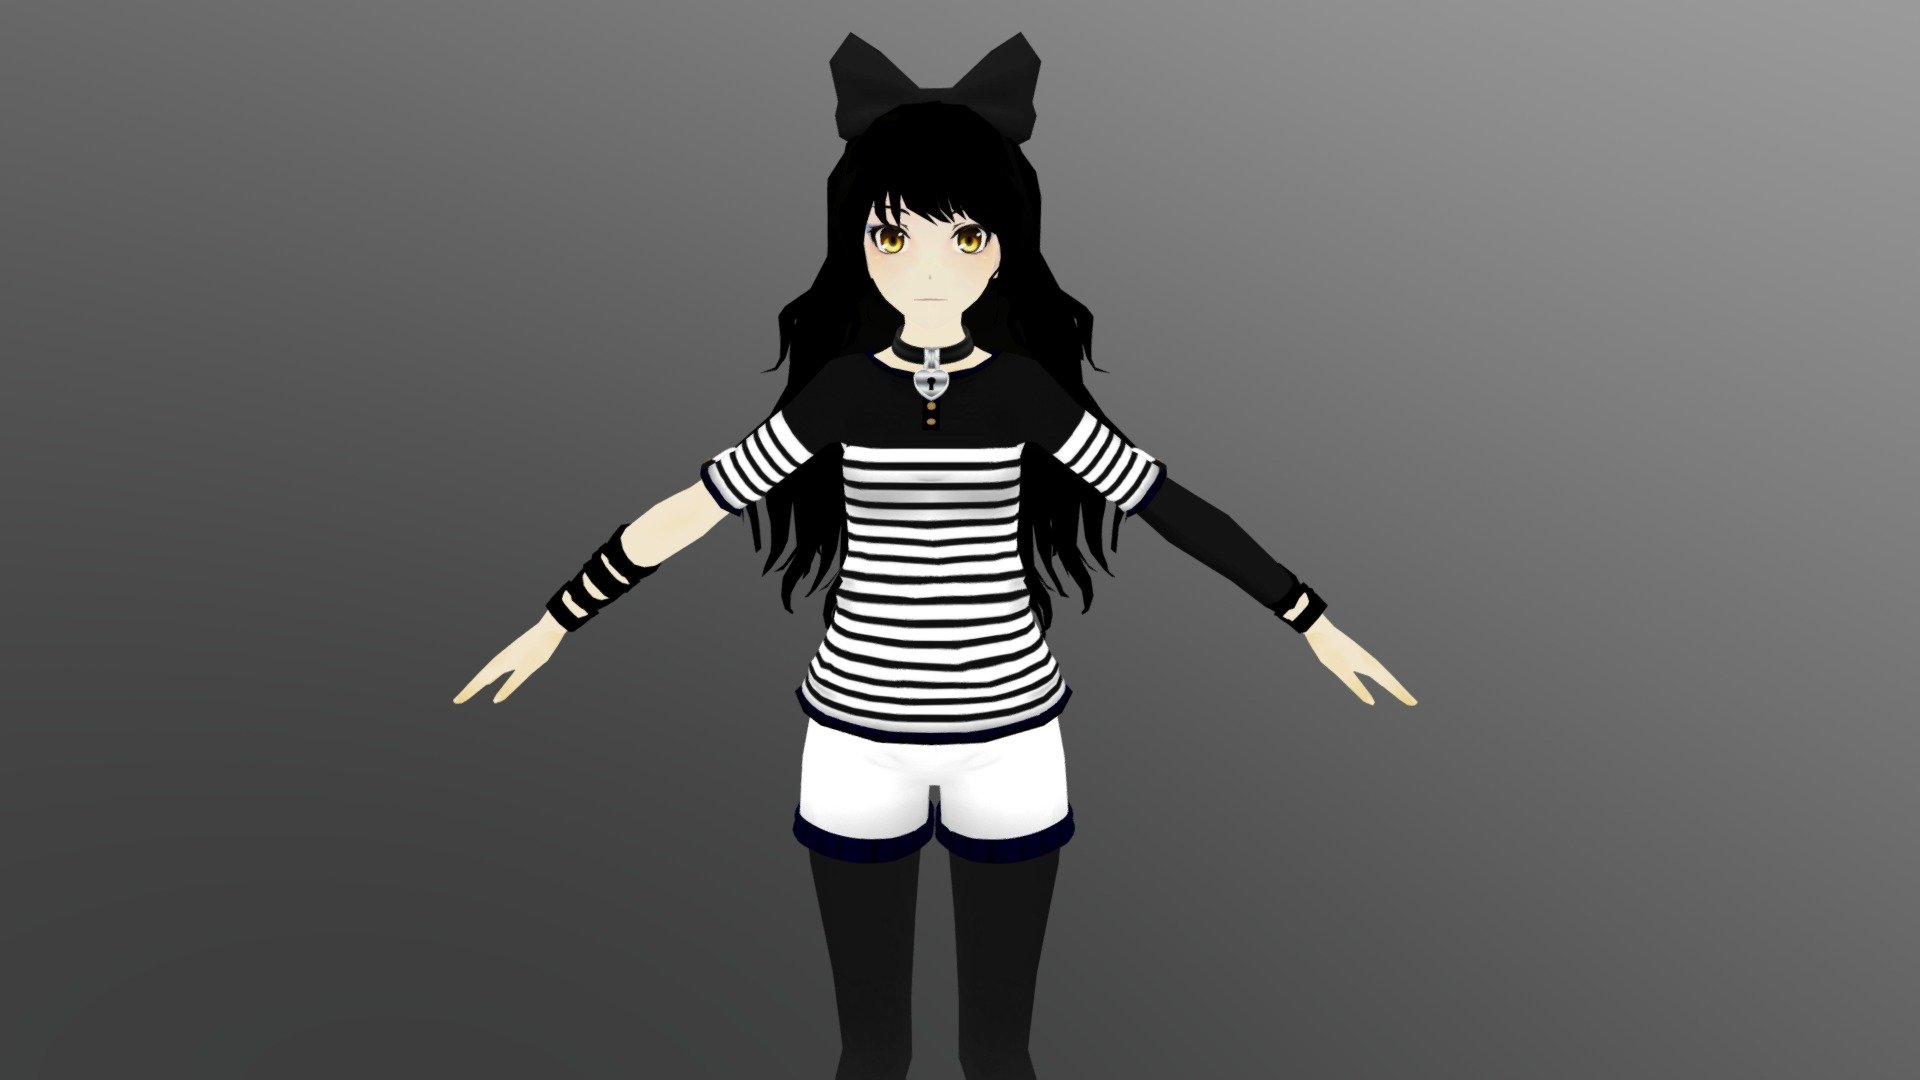 Blake Belladonna from RWBY in Casual outfit!

Just for viewing. Ported for VRChat available at vrcmods
(FOR VRC use only)

CREDITS:

TheClassicThinker (Blake MODEL)
link: (https://www.deviantart.com/theclassicthinker/art/MMD-Blake-Belladonna-Casual-Wear-DL-767181312)

kreifish (Chokers) - Blake Belladonna - Casual Wear - 3D model by Scarlette 3d model